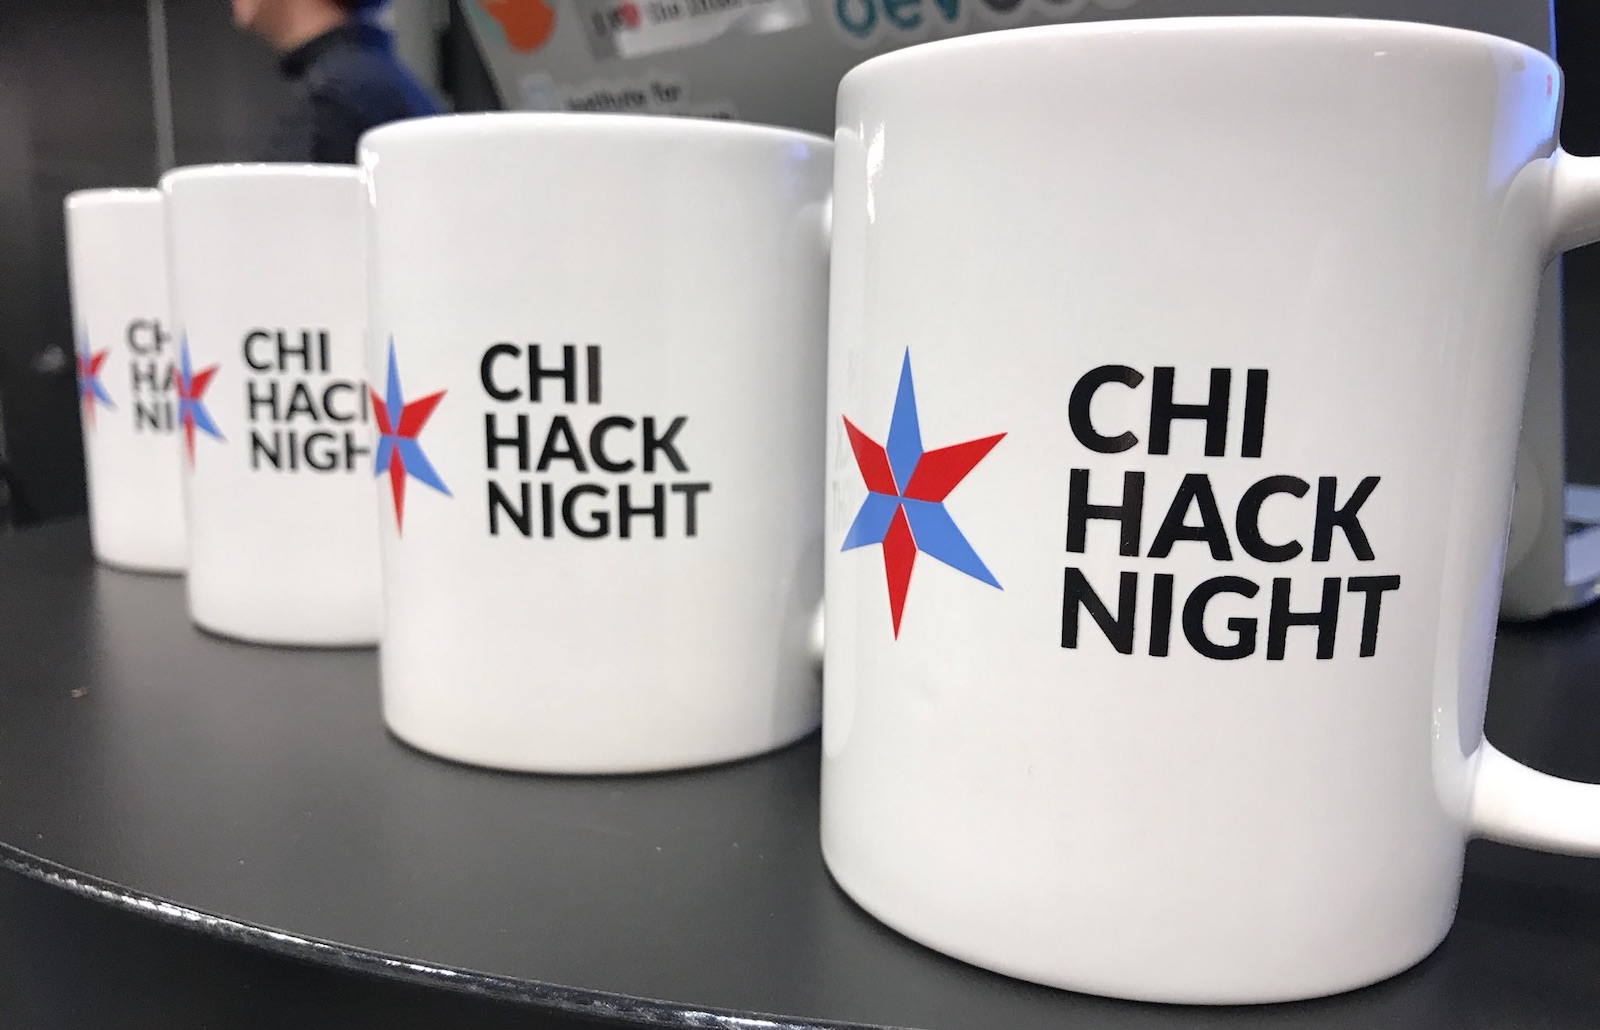 Chi Hack Night mugs, waiting to be gifted to our presenters. Photo by Ryan Koch